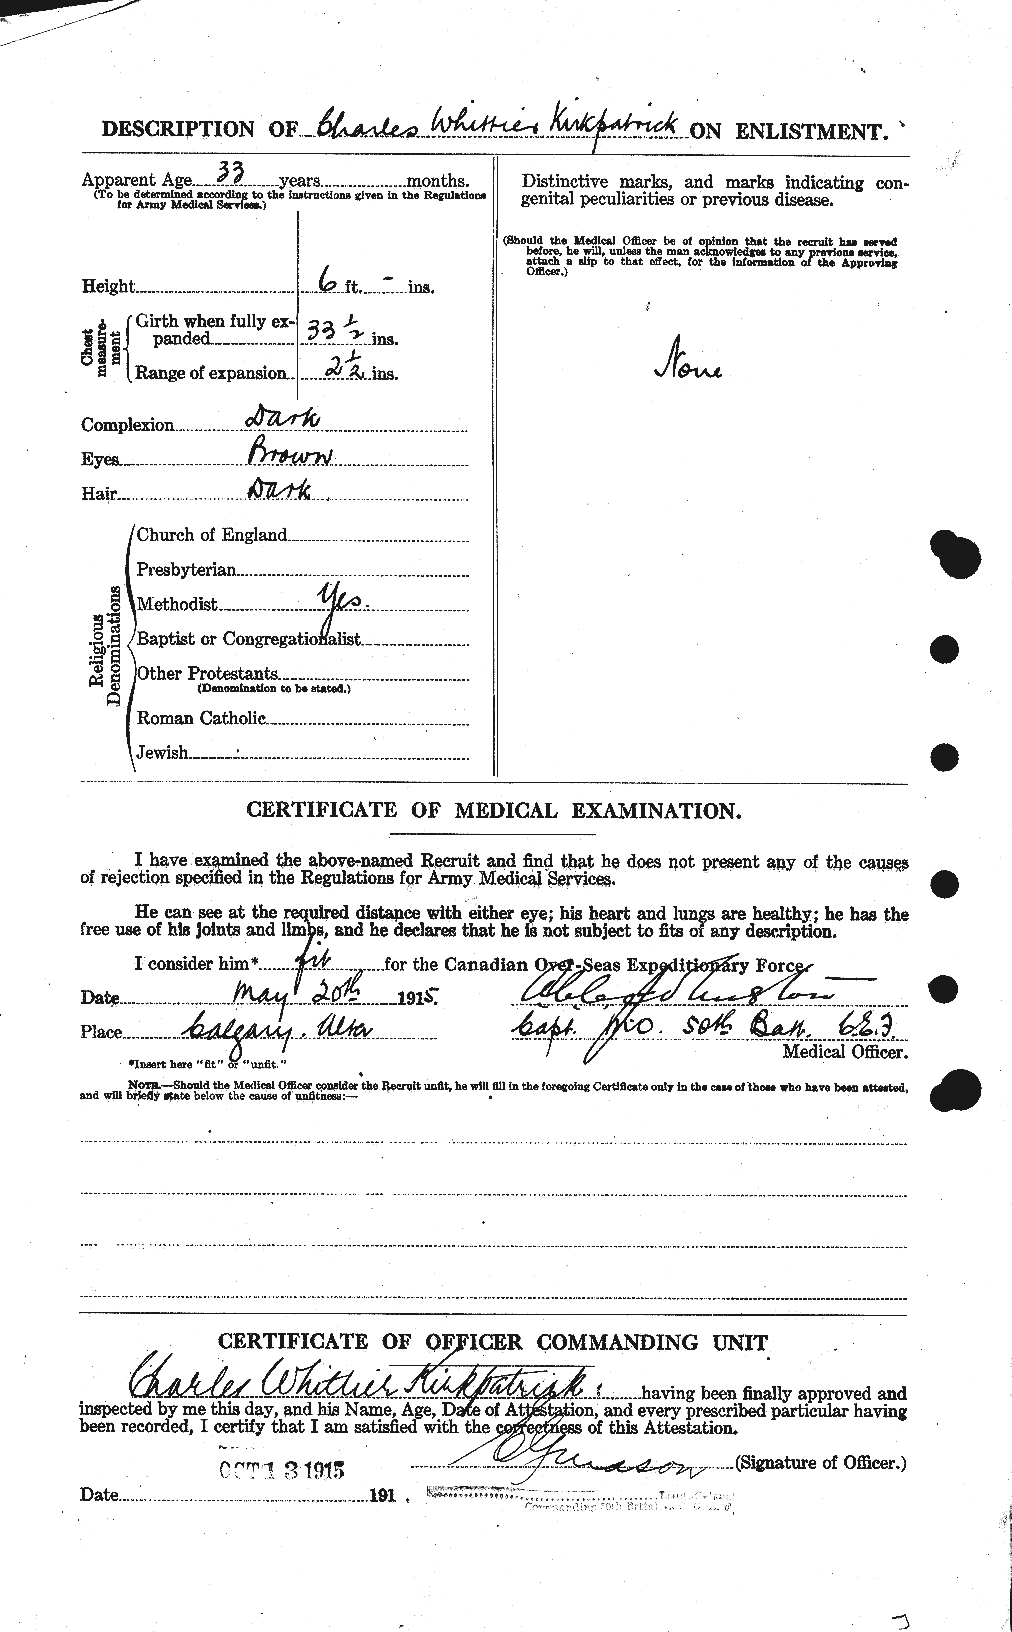 Personnel Records of the First World War - CEF 436034b